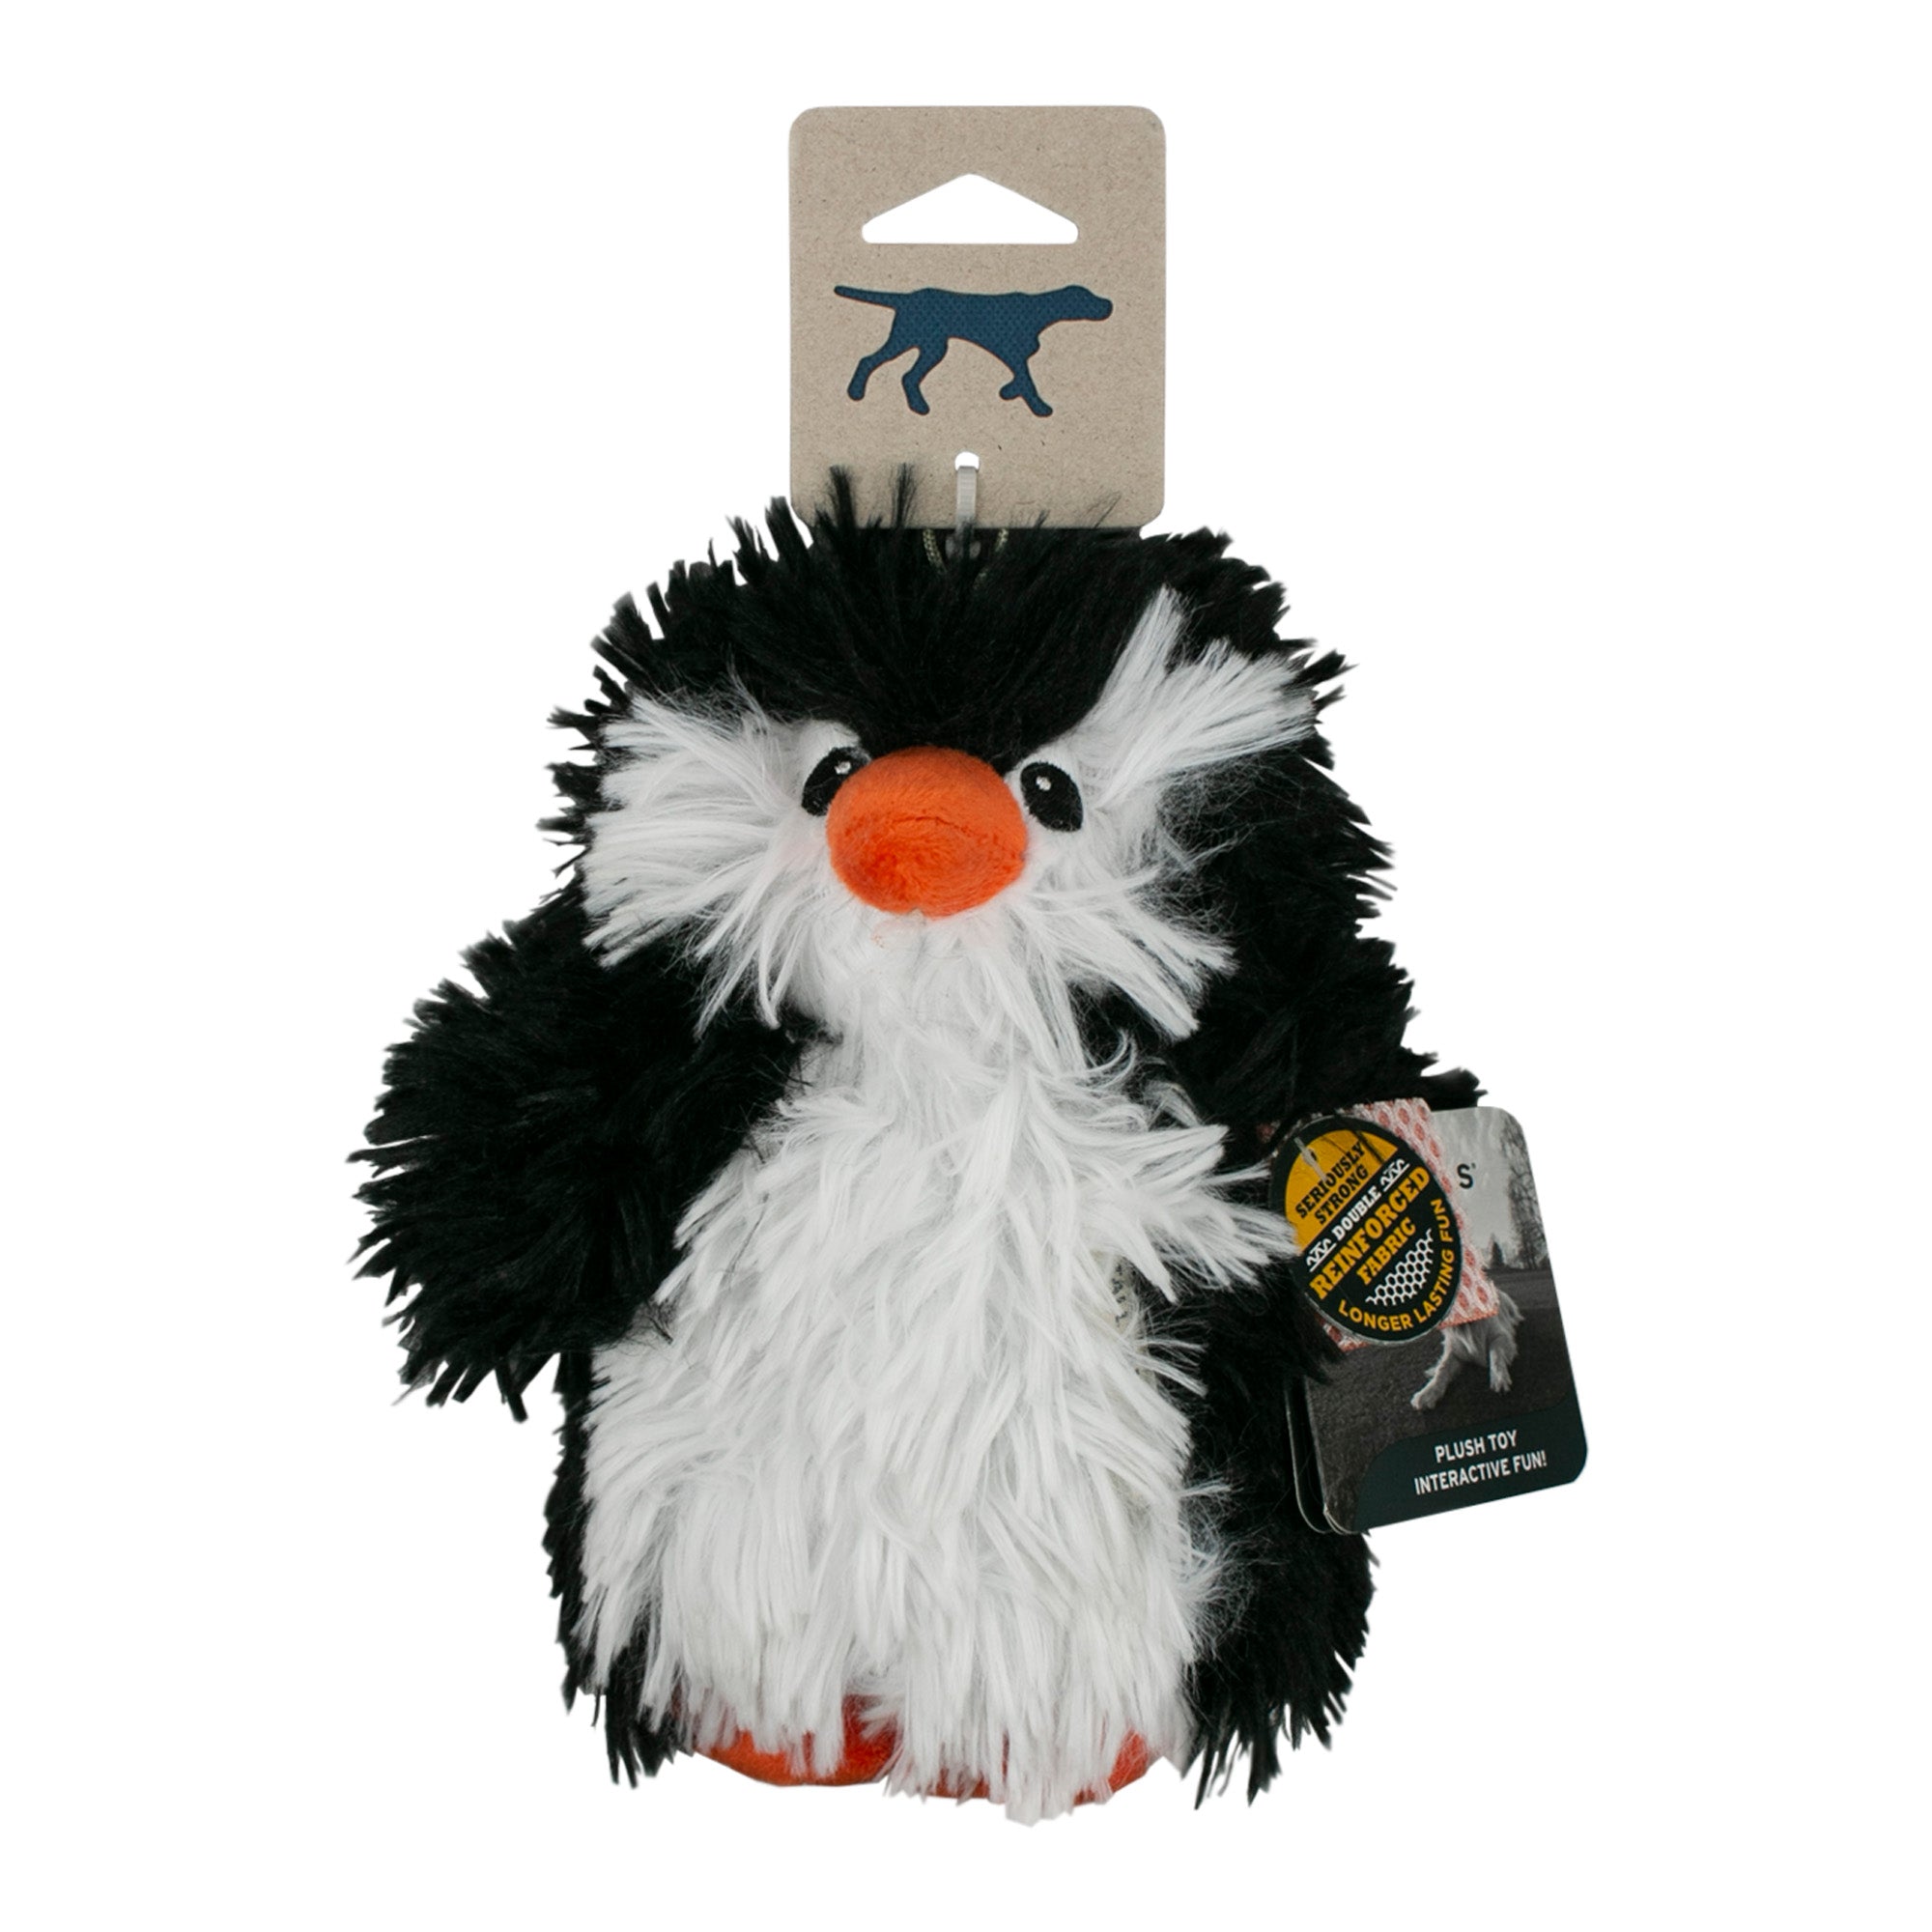 Squeaky Plush Dog Toy: Penguin Pull-Through Rope